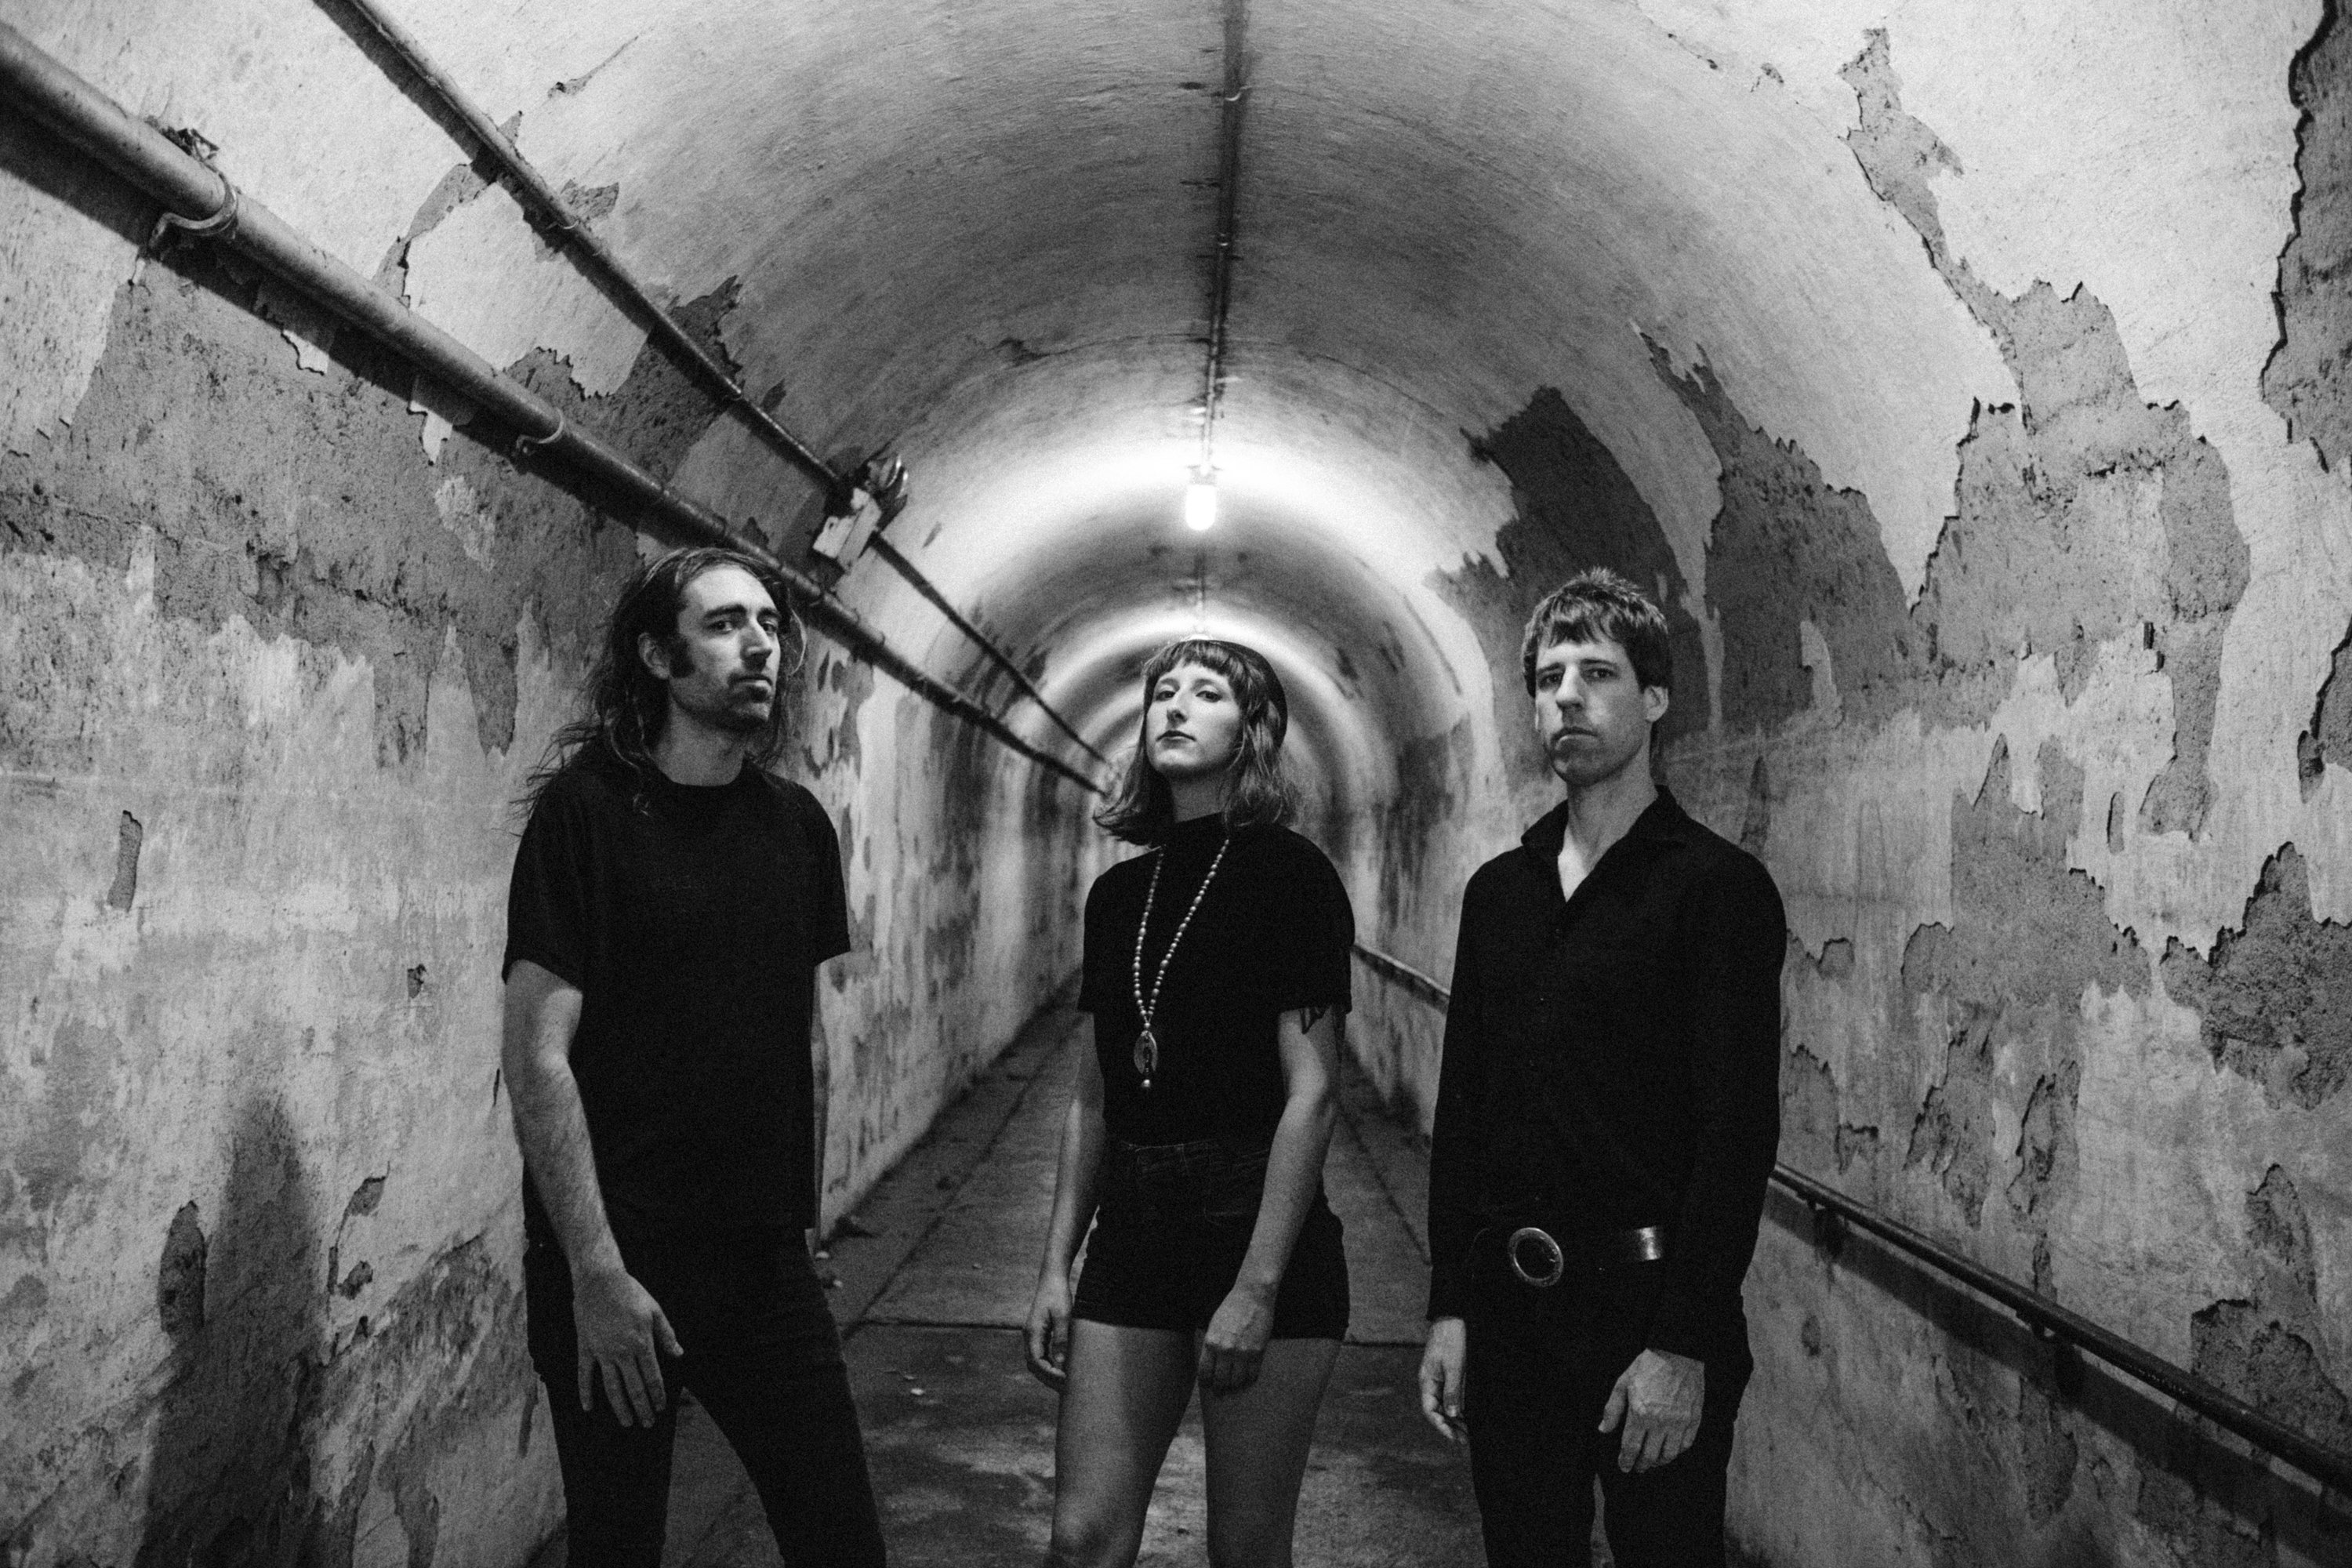 A Place to Bury Strangers Try 'Kicking Out Jams' on Their New 7"